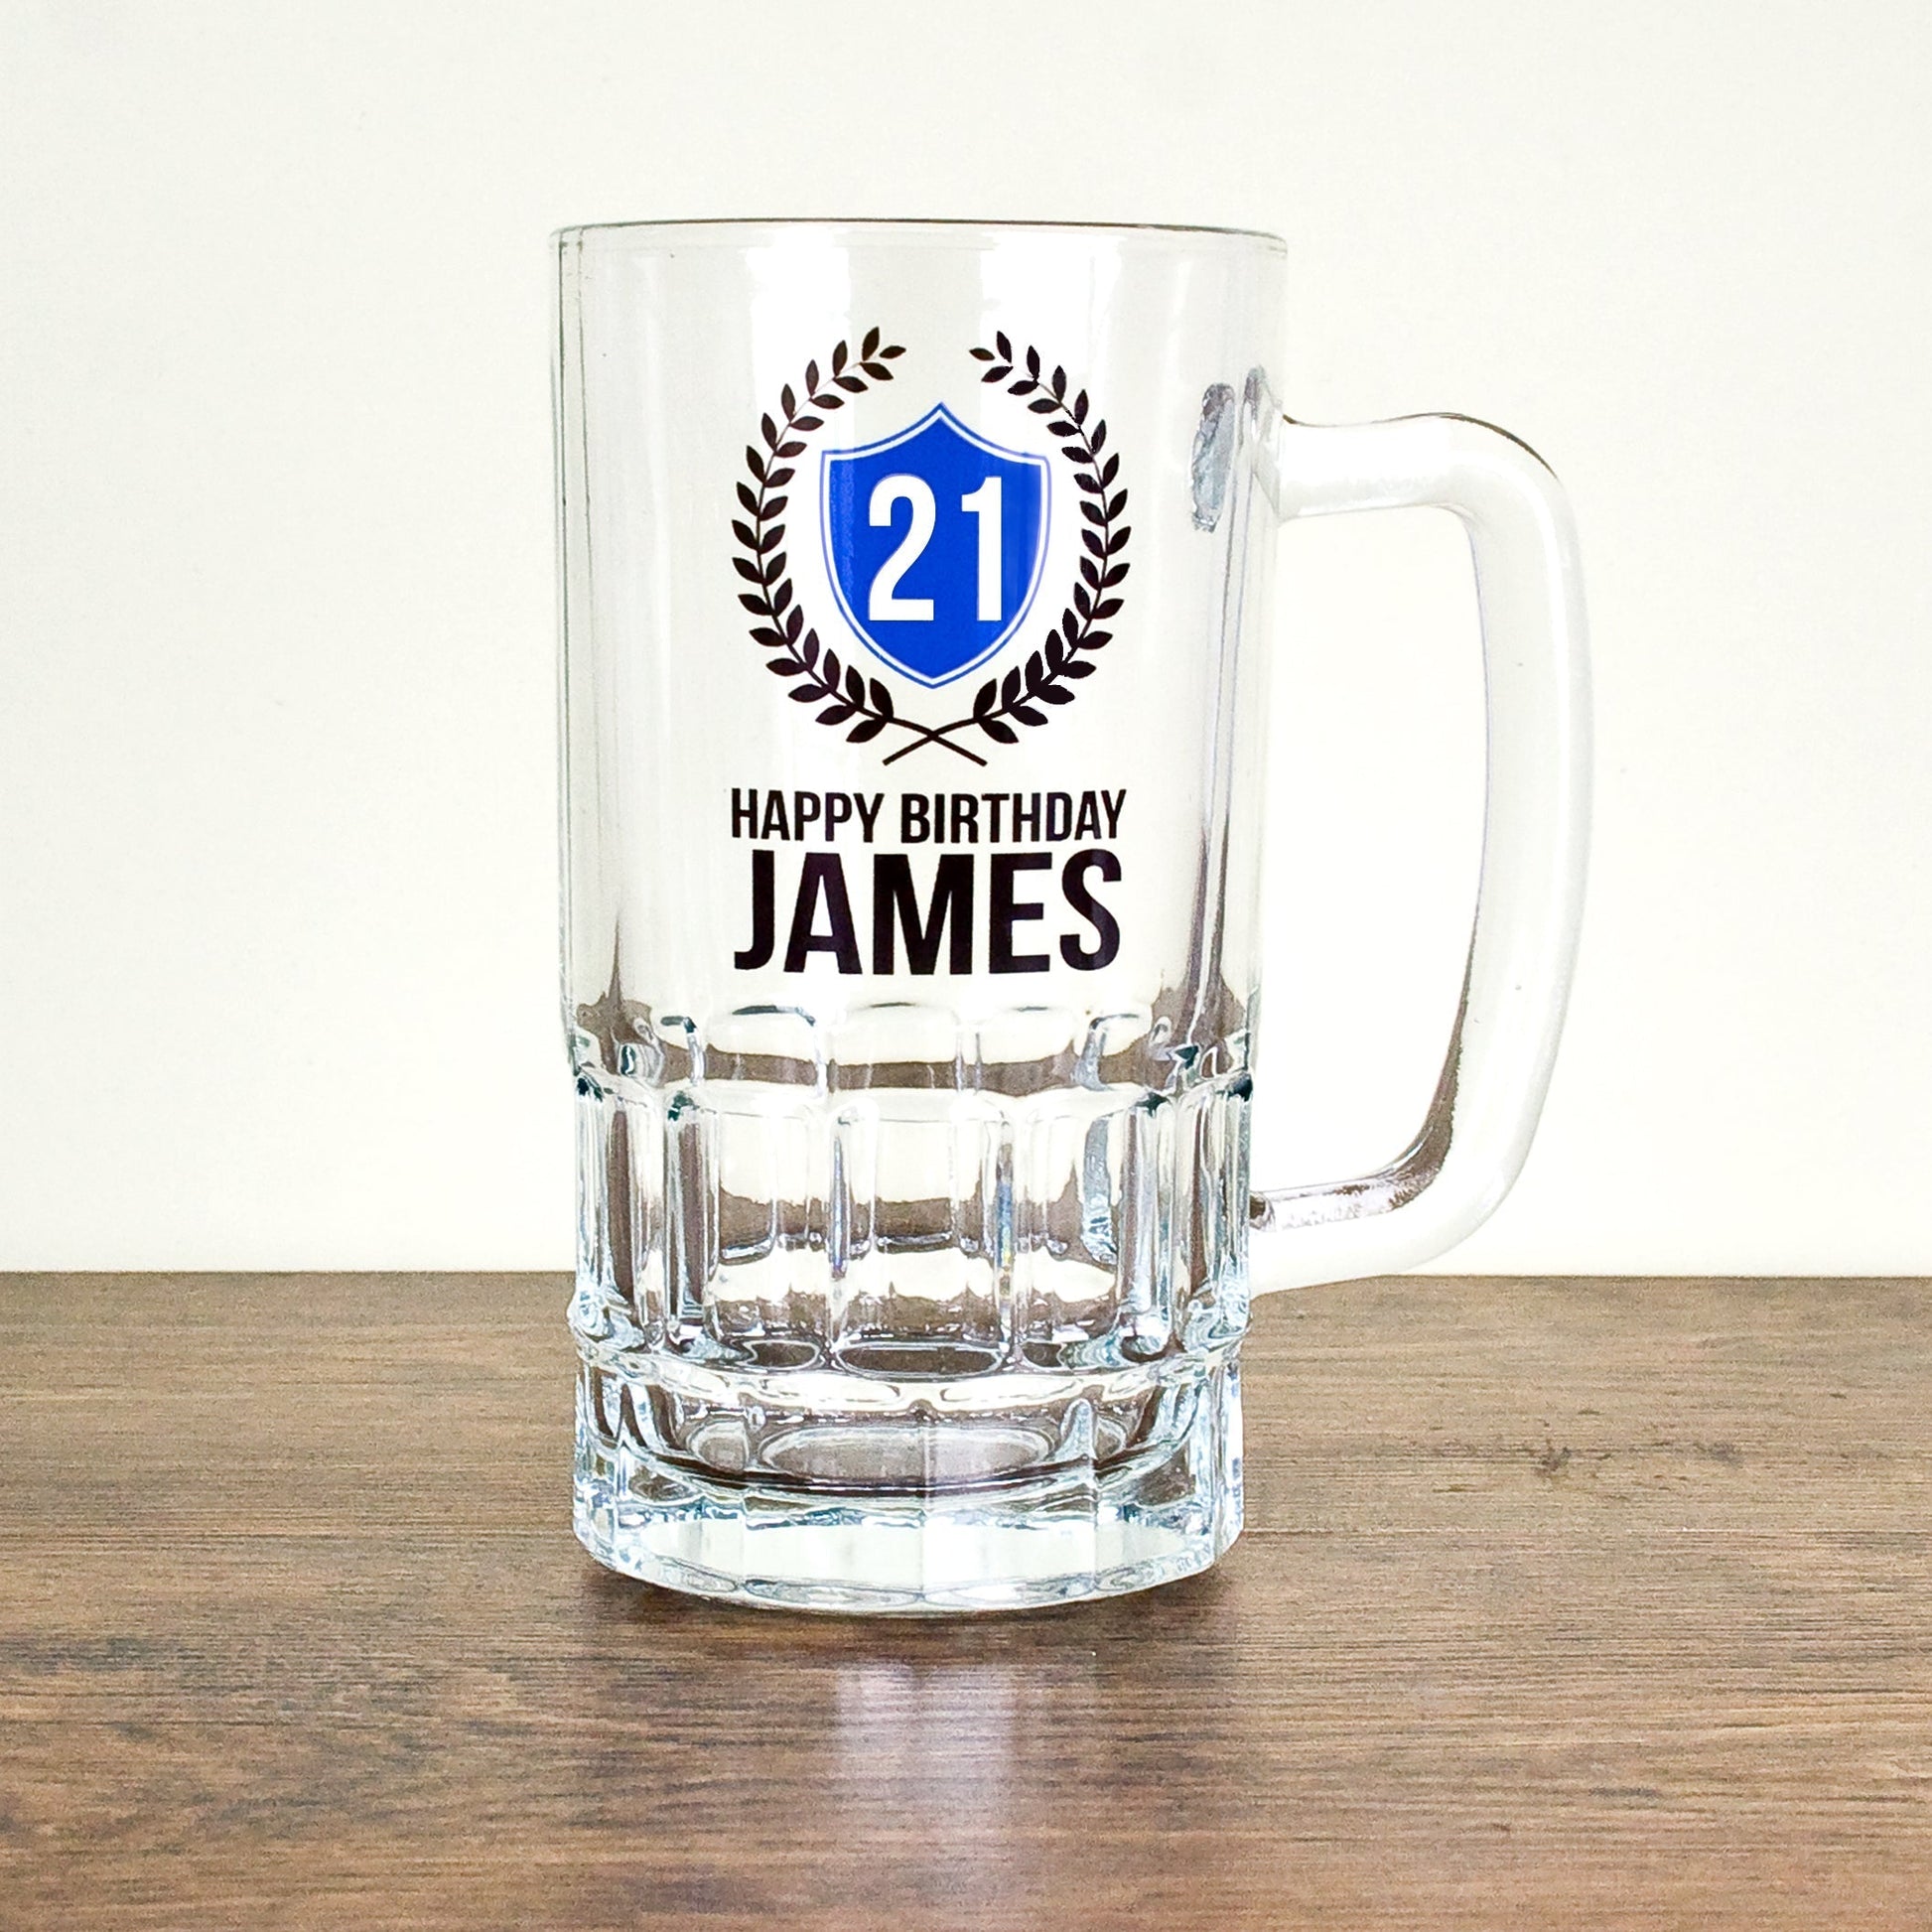 Personalized Beer Tankards - Personalized Happy Birthday Tankard 